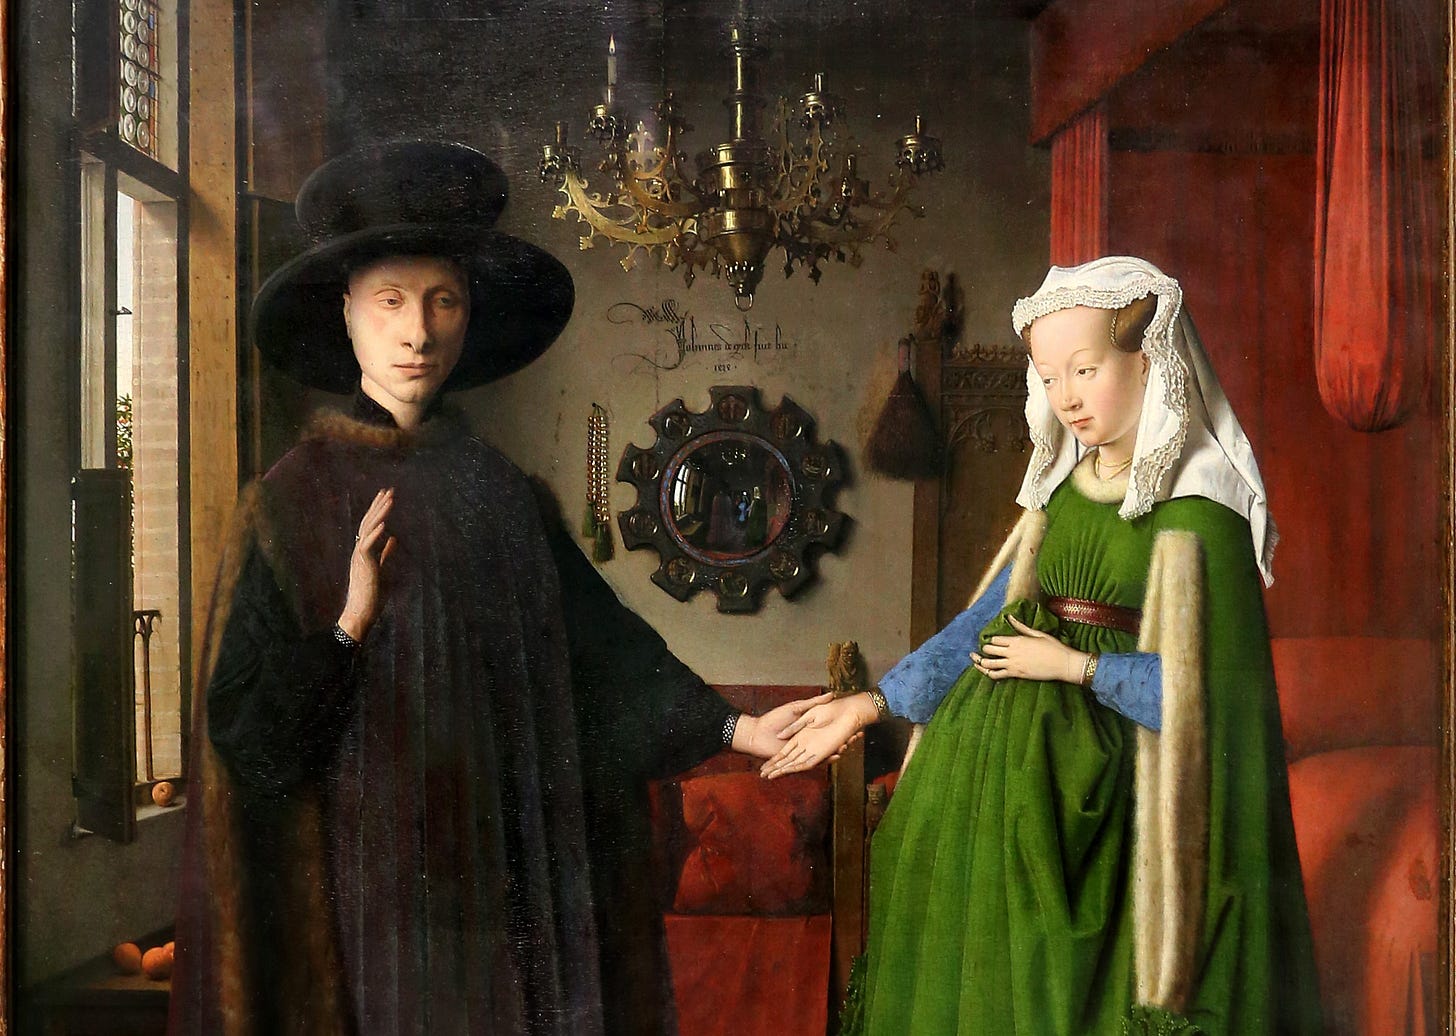 Fifteenth-century artist Jan van Eyck couldn’t resist sneaking himself into his famous Arnolfini Portrait. In a not-so-secret act of self-promotion, van Eyck wrote “Jan van Eyck was here 1434” on the wall in Latin behind the two figures. But far less noticeable are the other two figures in this painting. If you take a close look at the mirror on the wall, you’ll be able to spot two people who appear to be standing about where the “viewer” of this scene would be. It is widely believed that the one with his hand raised is supposed to be van Eyck.